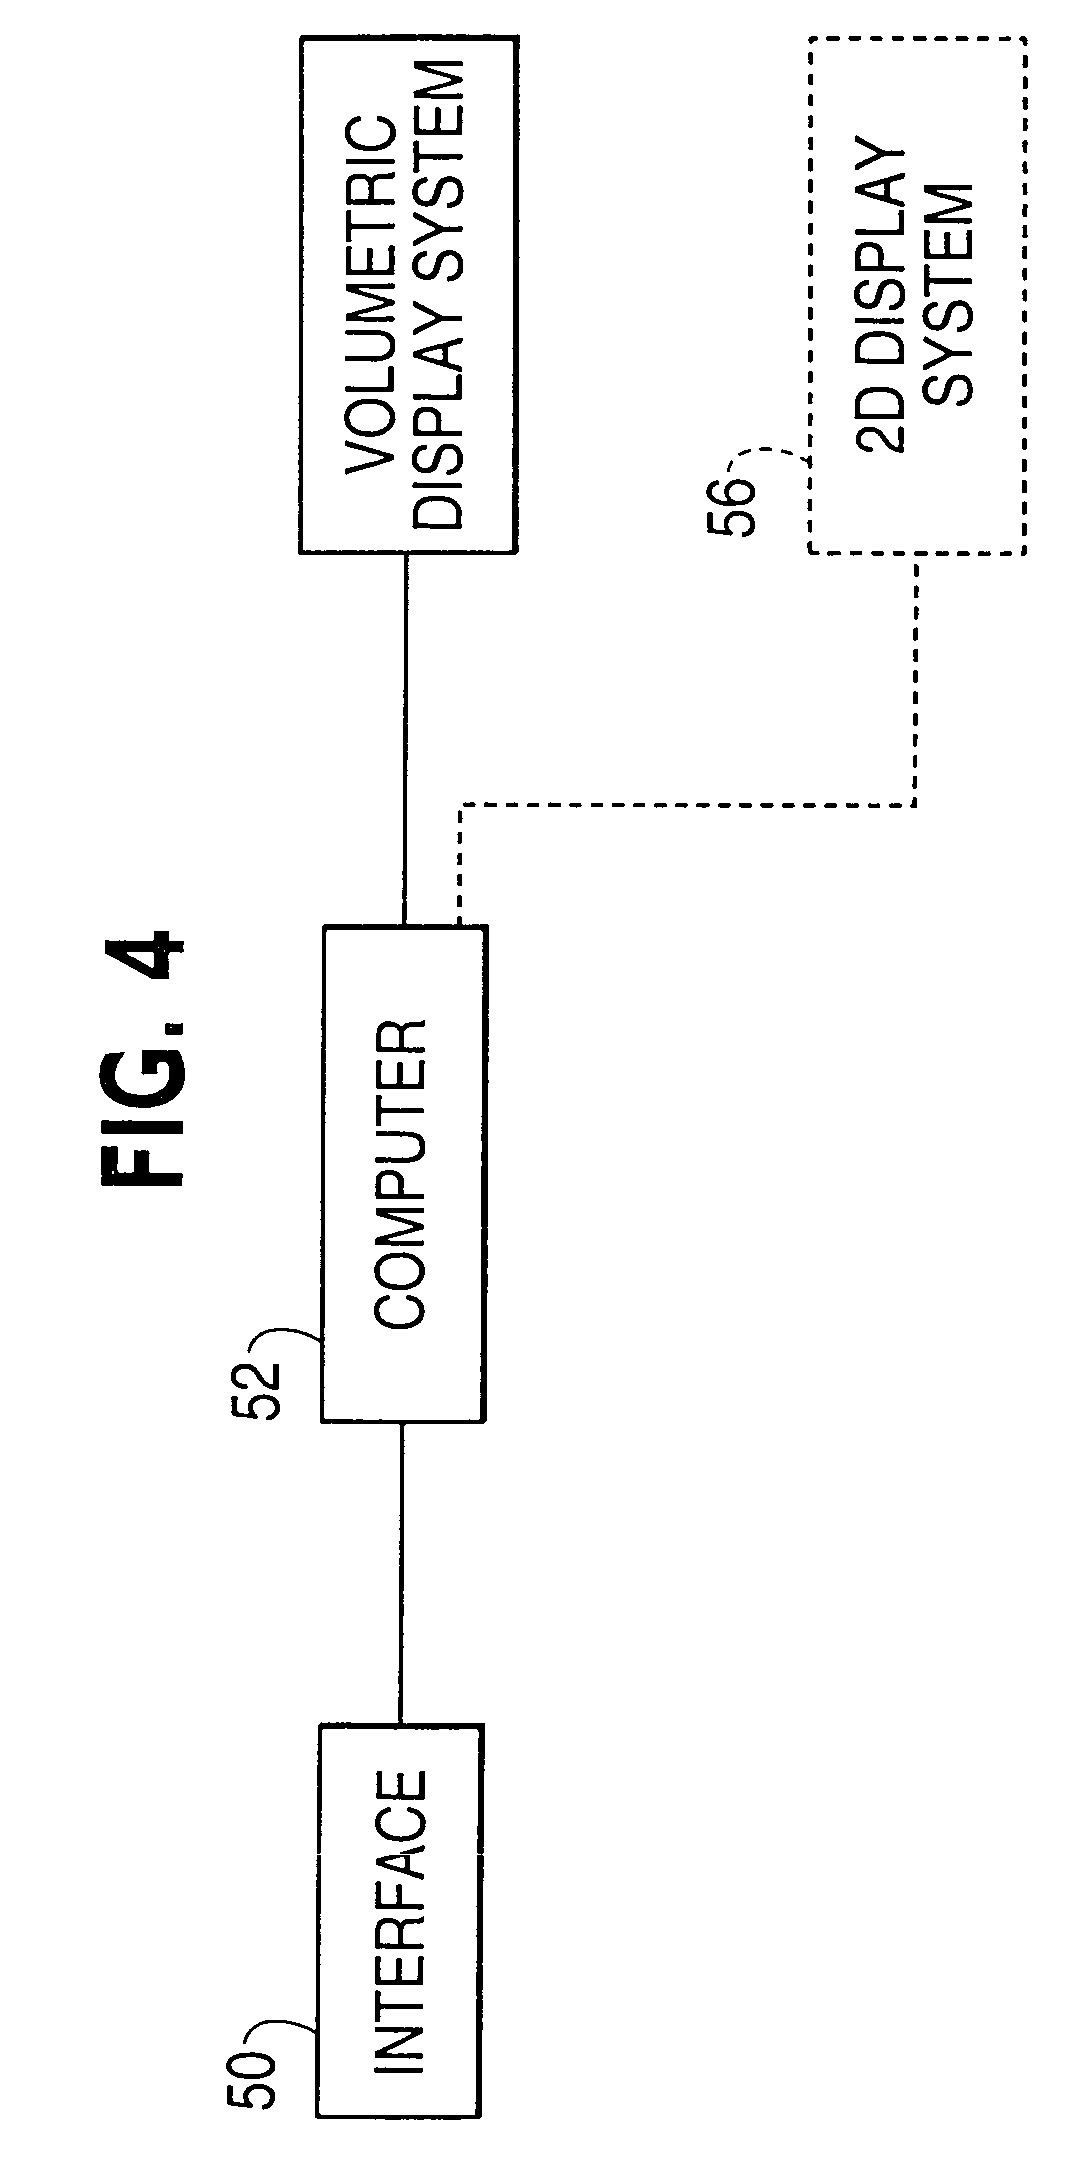 Widgets displayed and operable on a surface of a volumetric display enclosure